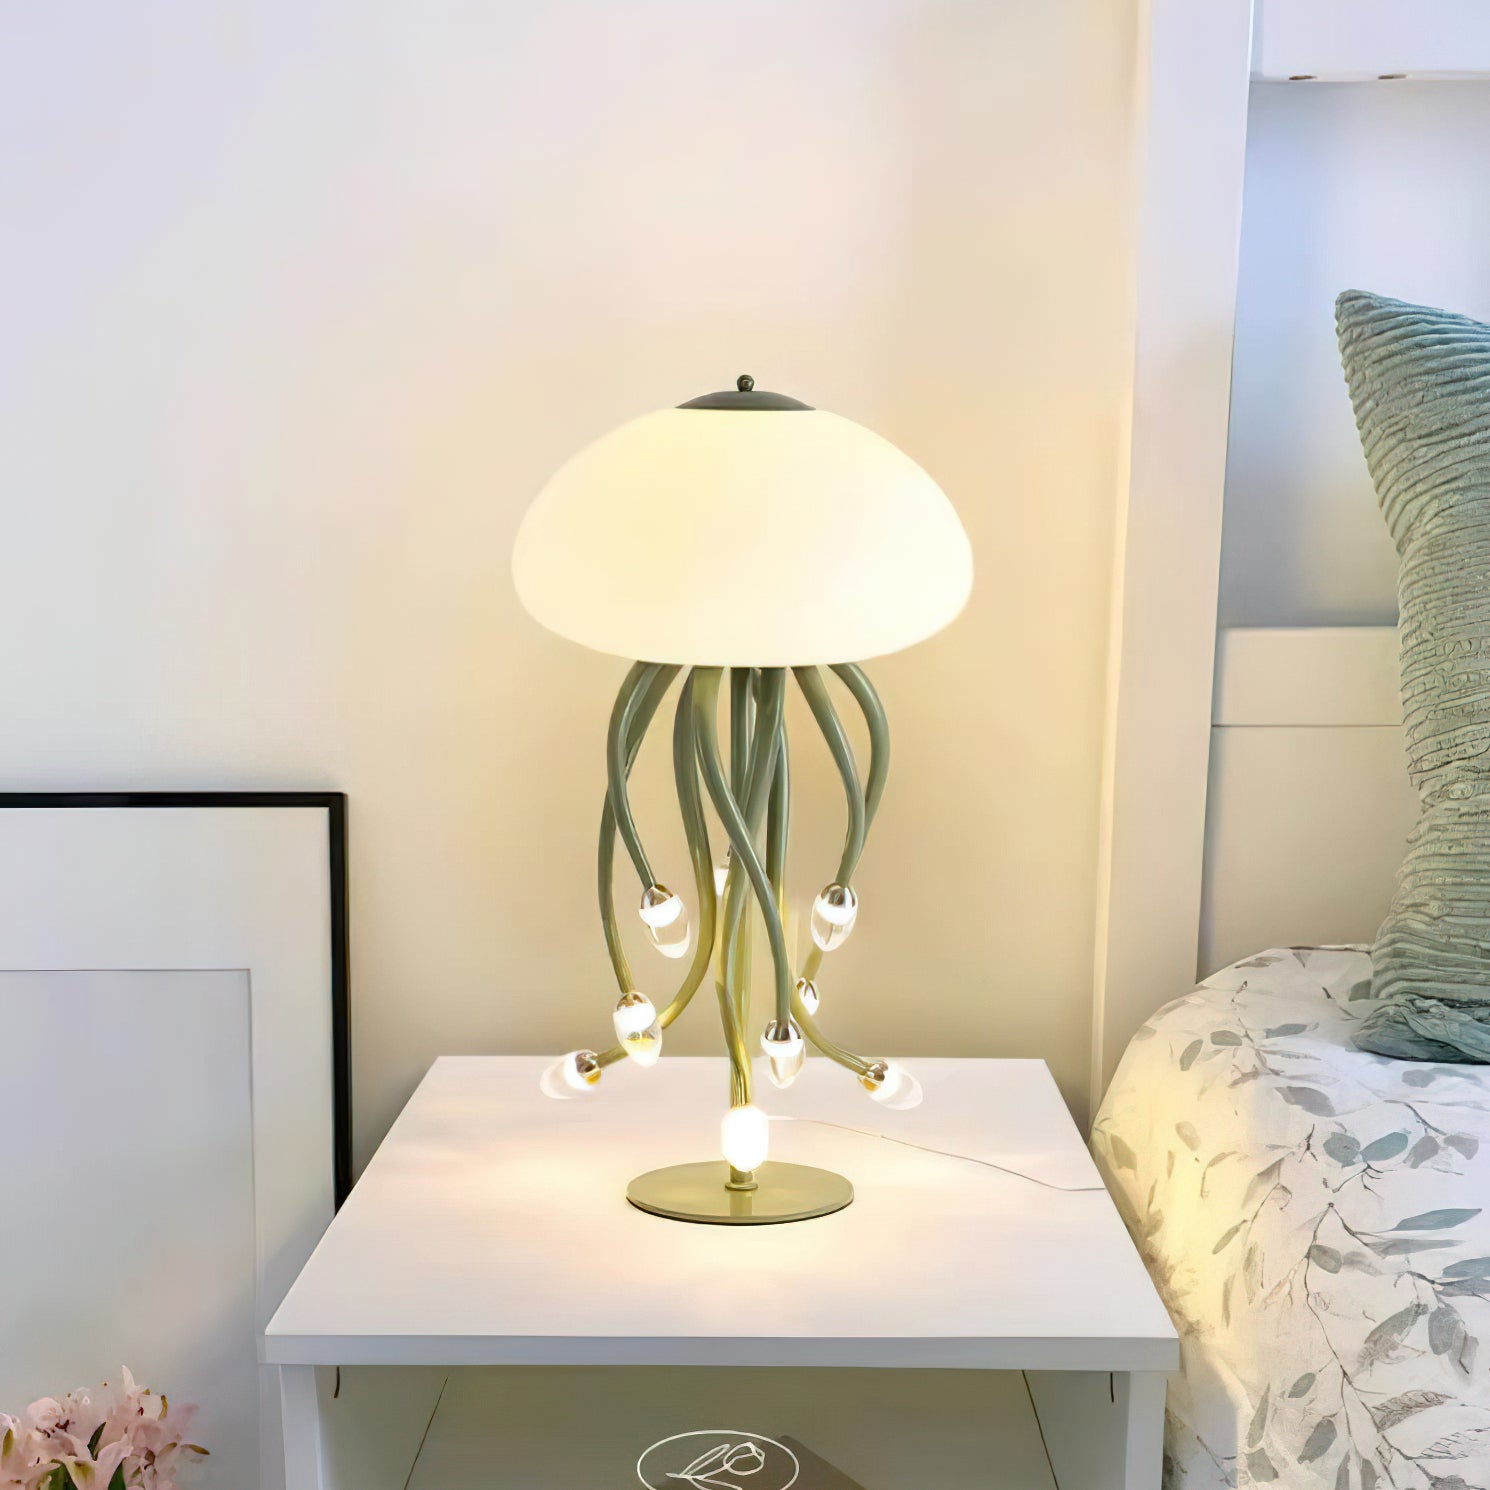 How To Set Up A Jellyfish Lamp